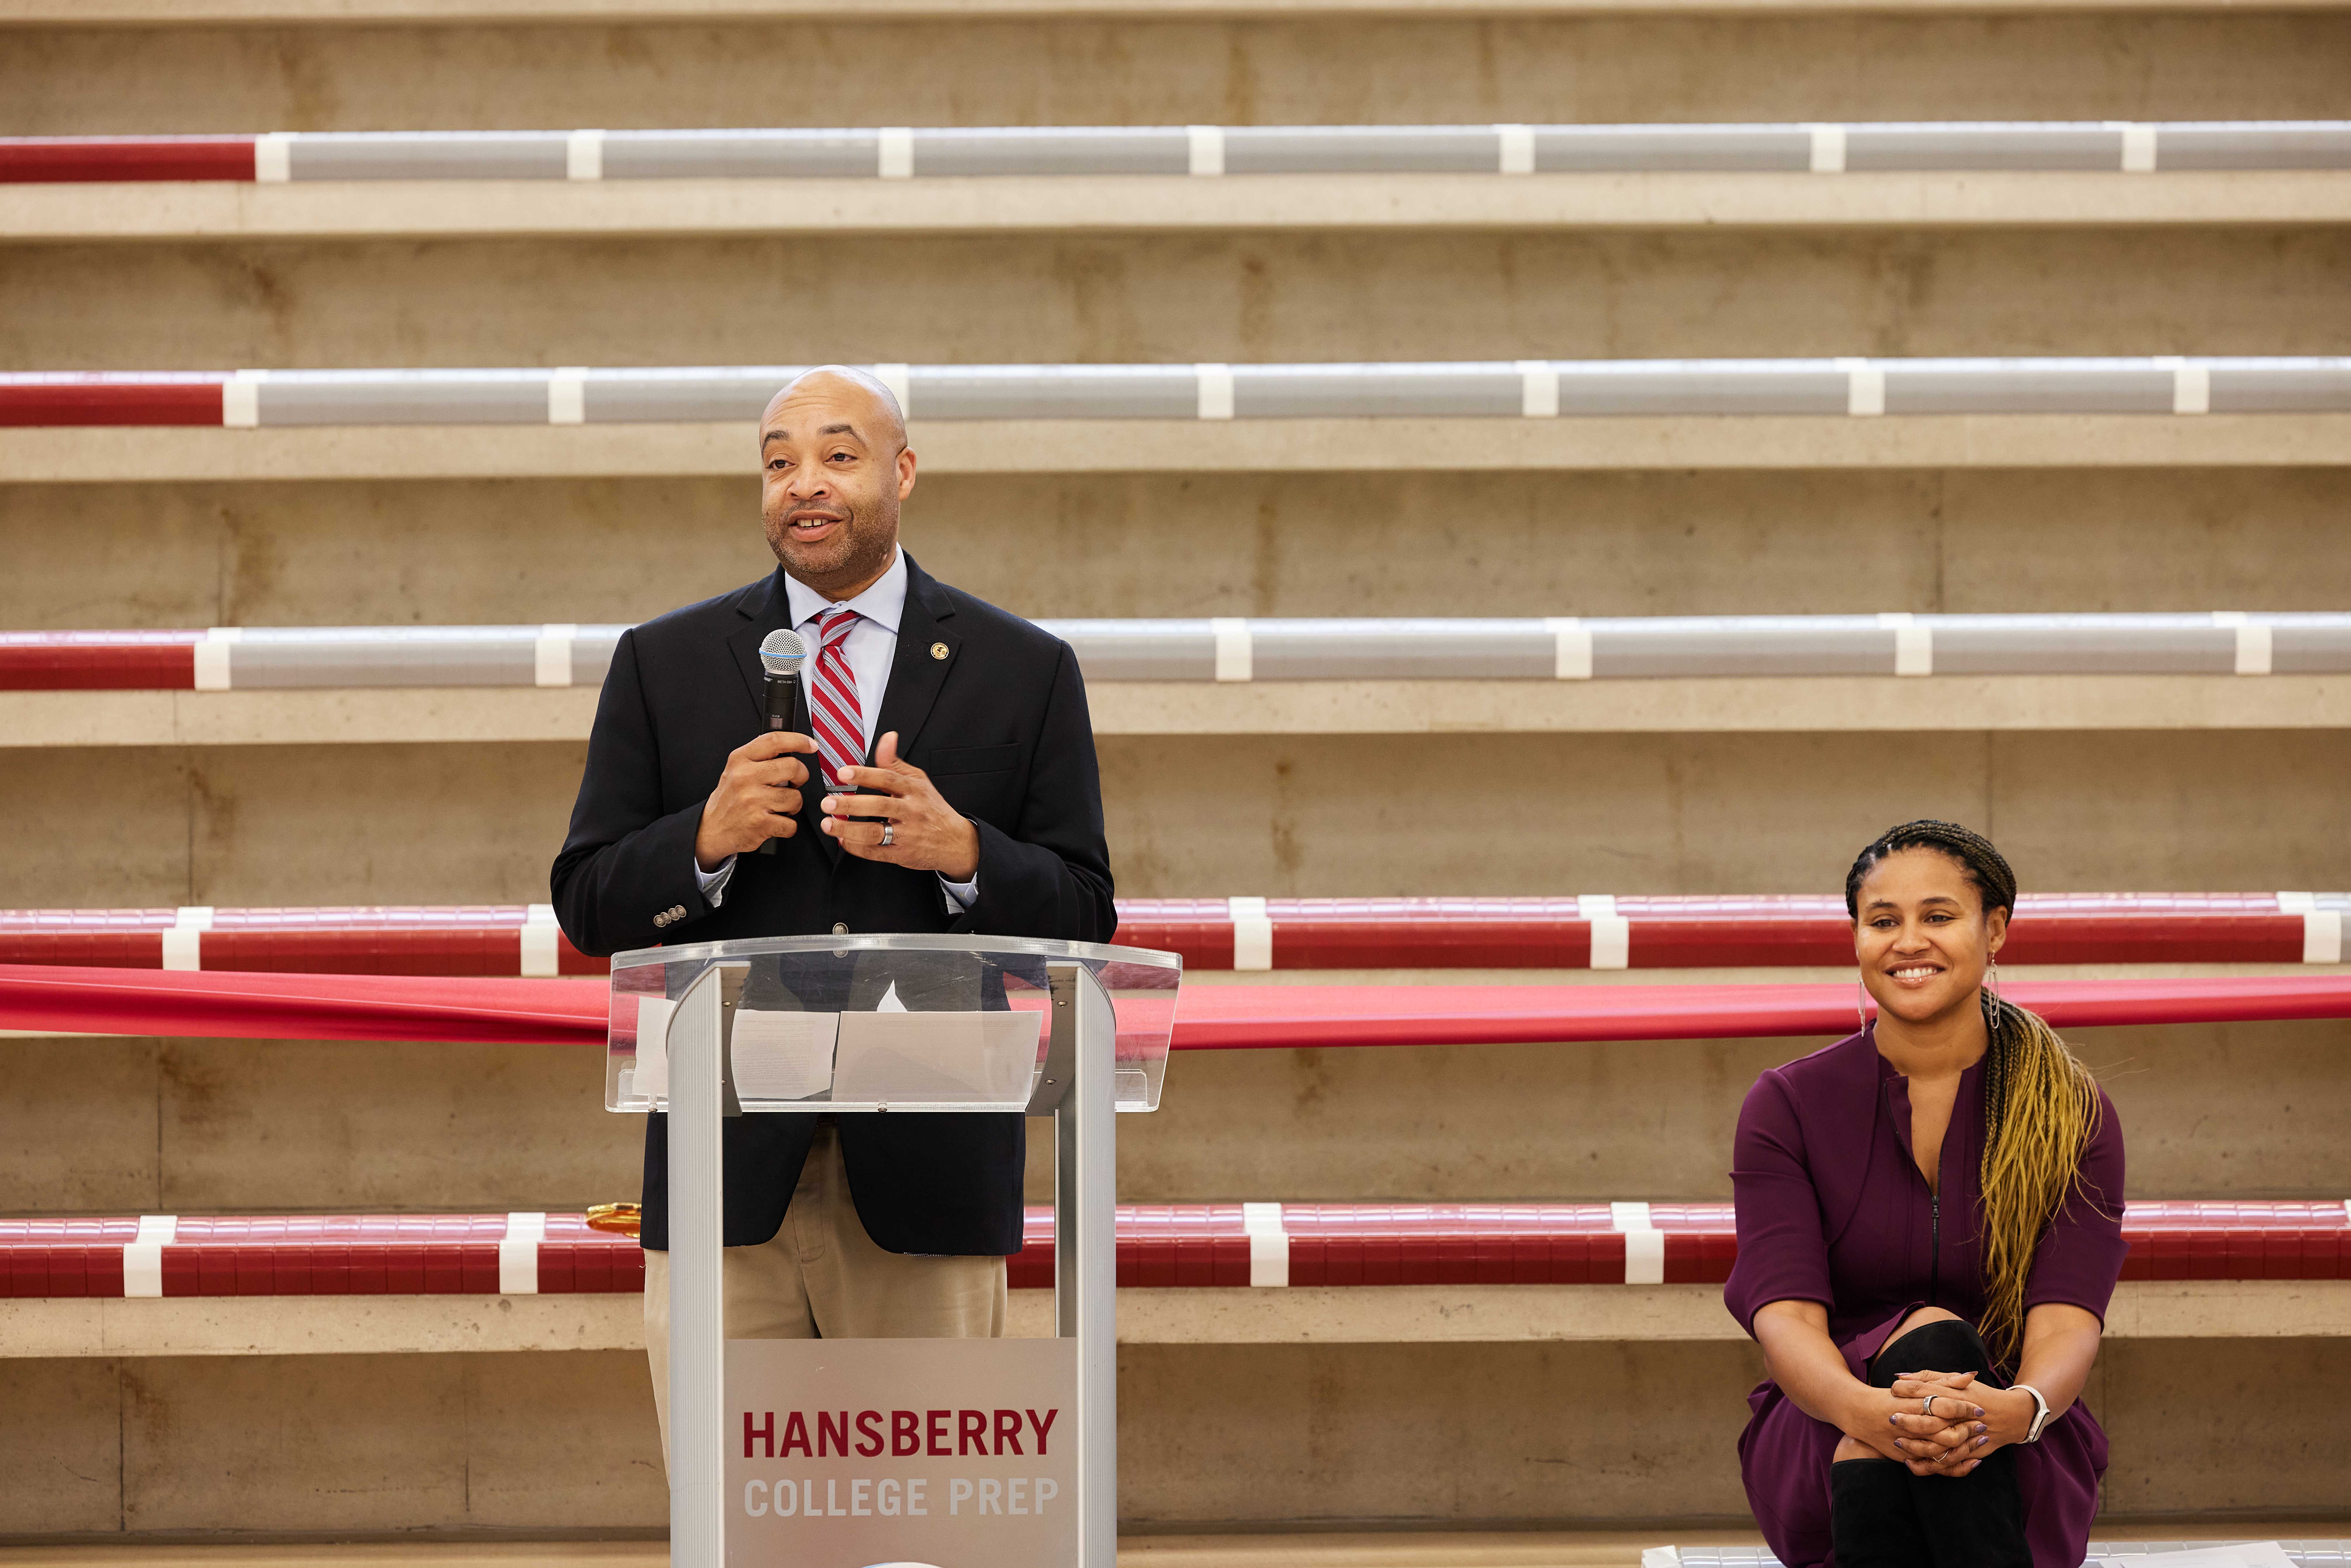 This photo shows Illinois State Representative Justin Slaughter speaking behind a podium at the Hansberry College Prep new gym renovation ribbon-cutting ceremony. Behind him, Noble Schools' CEO Constance Jones is sitting on the brand new bleachers.